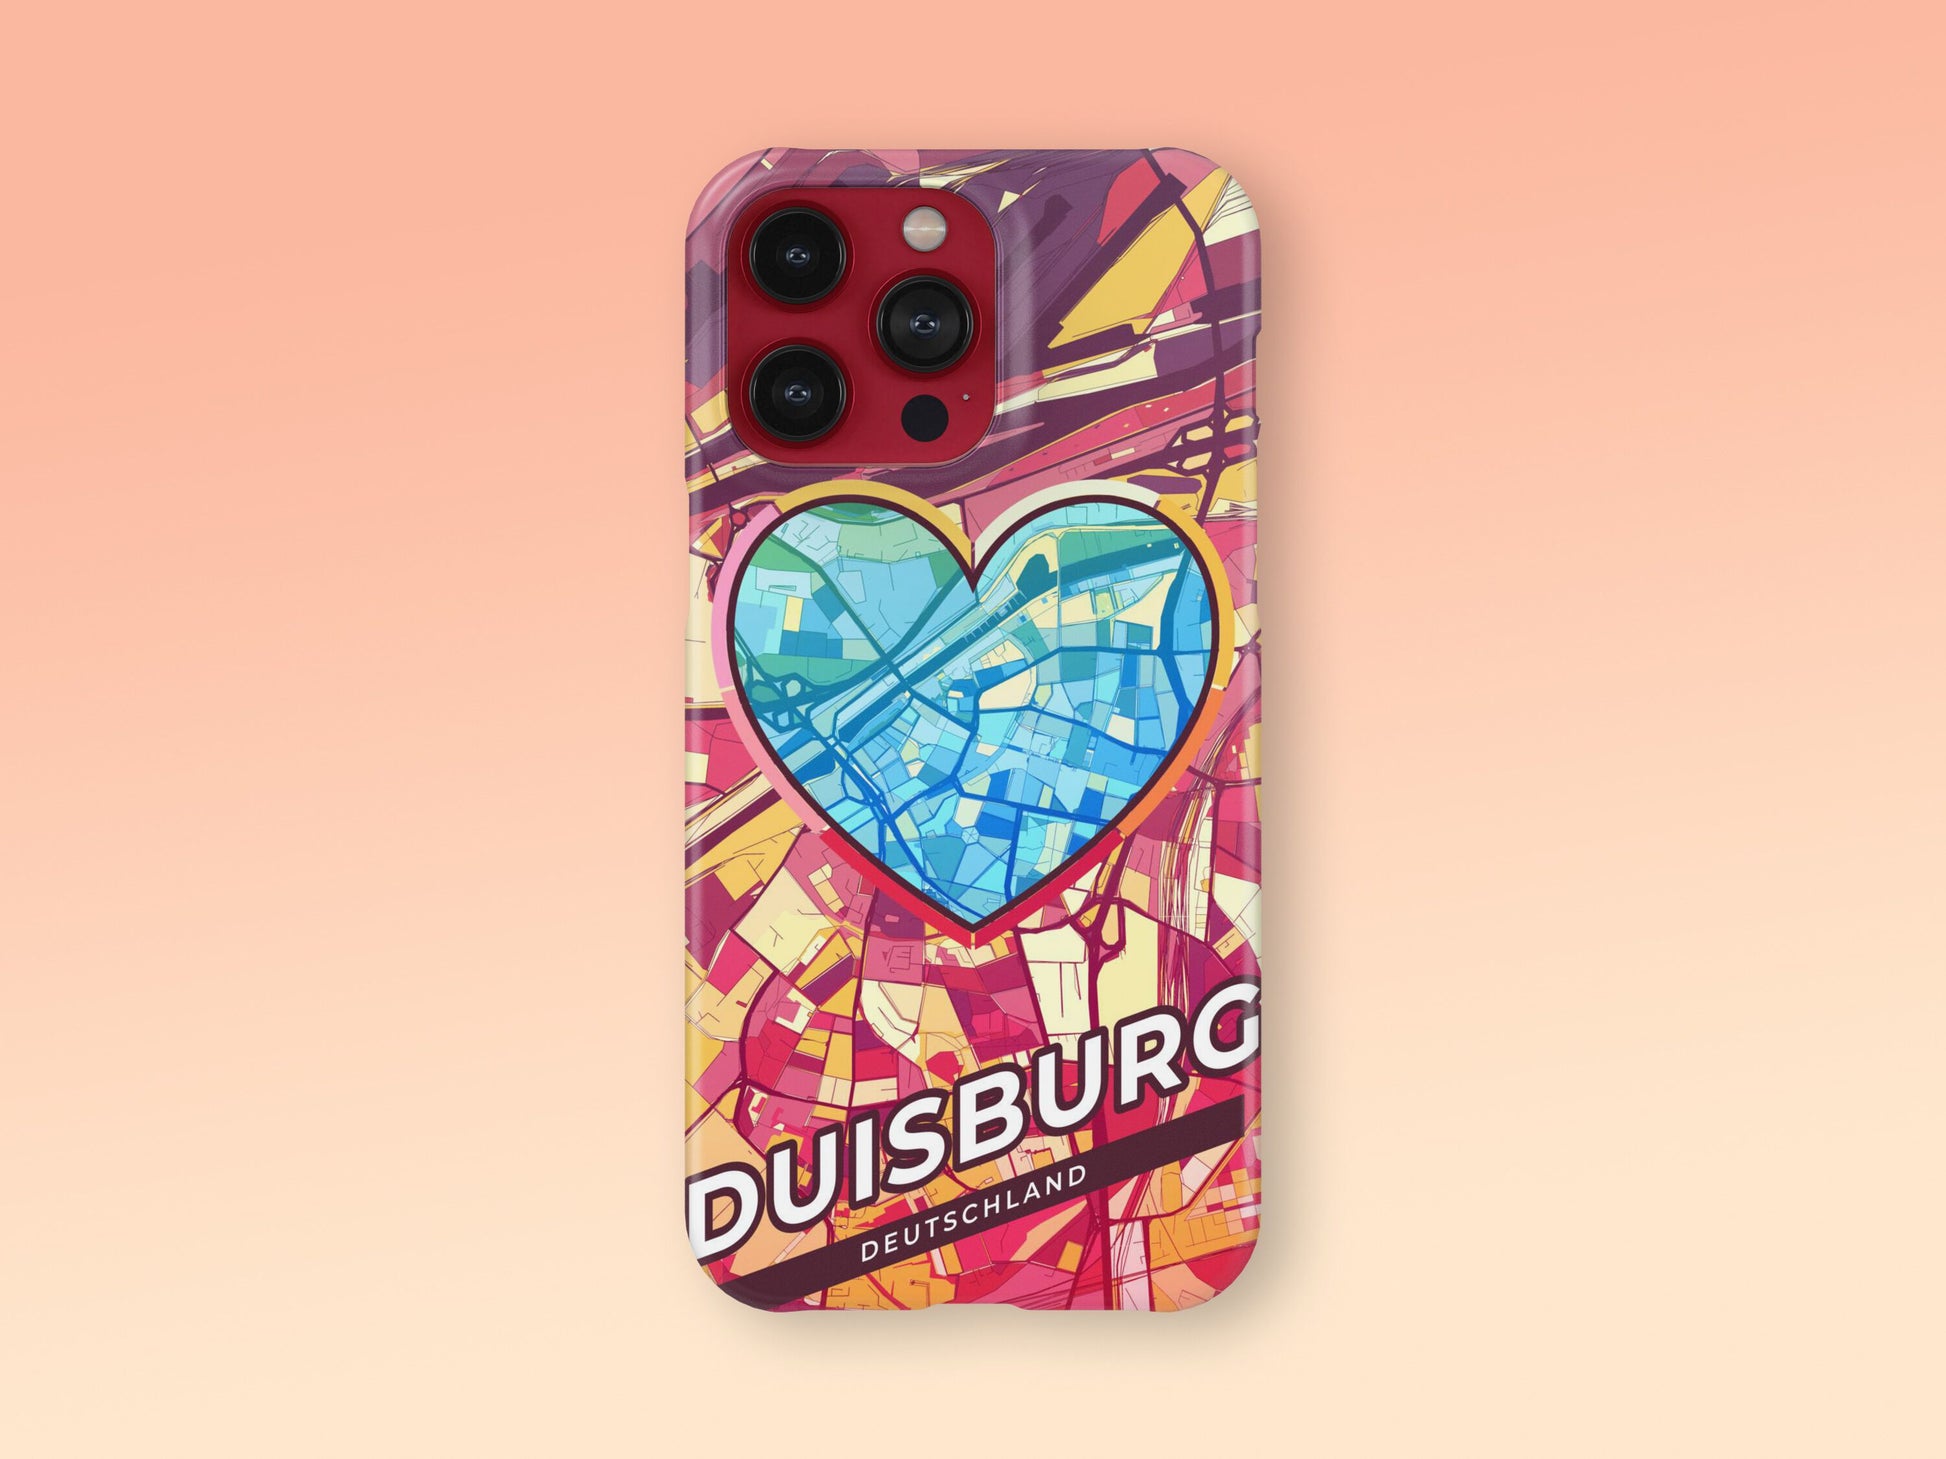 Duisburg Deutschland slim phone case with colorful icon. Birthday, wedding or housewarming gift. Couple match cases. 2